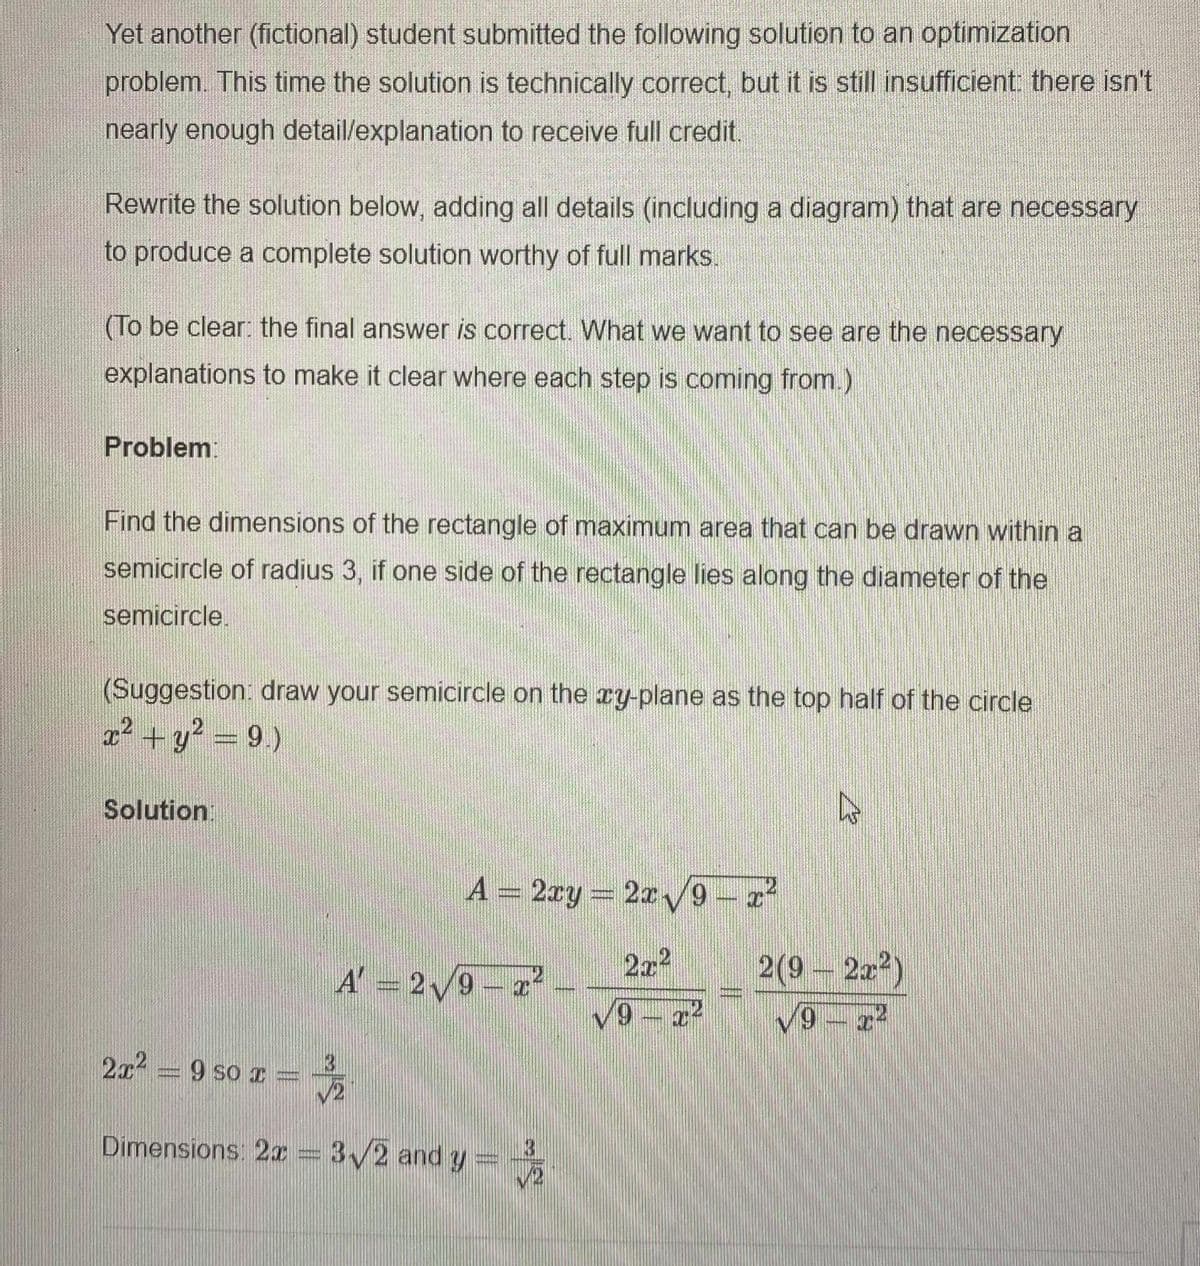 Yet another (fictional) student submitted the following solution to an optimization
problem. This time the solution is technically correct, but it is still insufficient there isn't
nearly enough detail/explanation to receive full credit.
Rewrite the solution below, adding all details (including a diagram) that are necessary
to produce a complete solution worthy of full marks.
(To be clear: the final answer is correct. What we want to see are the necessary
explanations to make it clear where each step is coming from.)
Problem:
Find the dimensions of the rectangle of maximum area that can be drawn within a
semicircle of radius 3, if one side of the rectangle lies along the diameter of the
semicircle.
(Suggestion: draw your semicircle on the ry-plane as the top half of the circle
? + y? = 9.)
Solution:
A = 2ry = 2r9-a
A' = 2/9-2
272
2(9 - 22?)
V9-2
2x = 9 so r
Dimensions: 2x = 3/2 and y =
